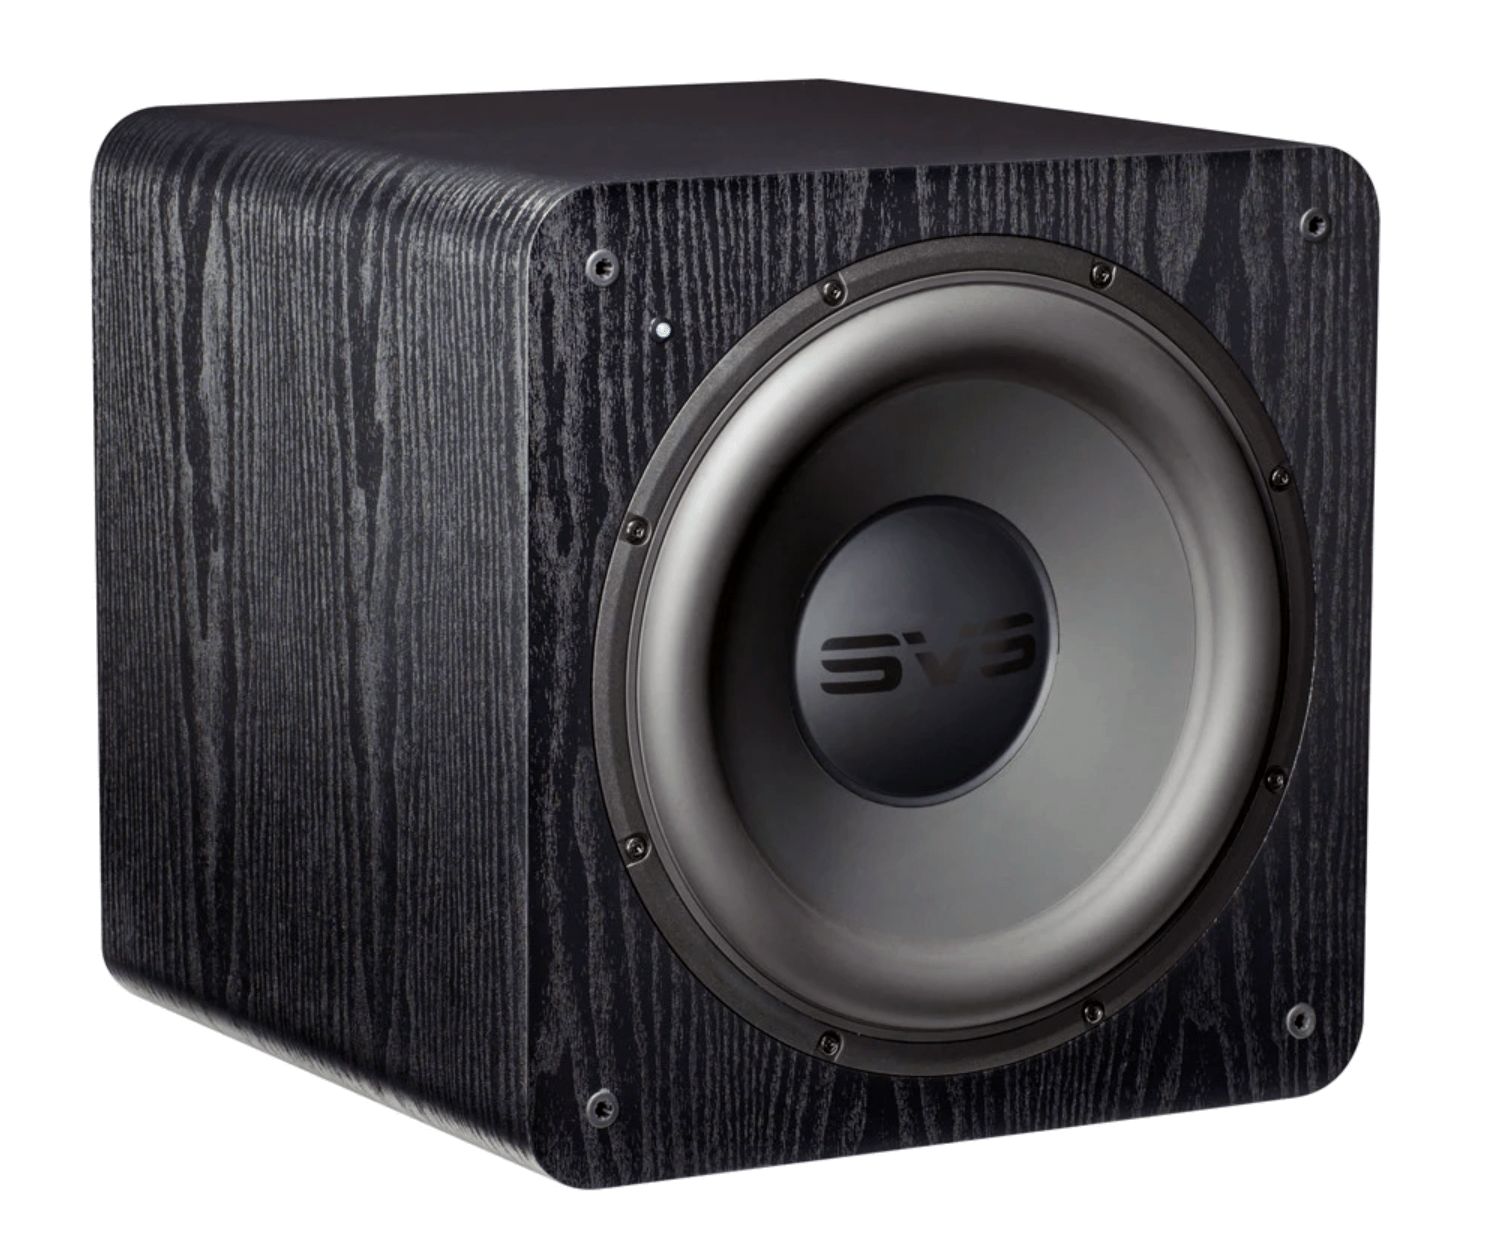 Big-time Black Friday savings on SVS Subwoofers are live now, get 'em while they last. 1a33a1b5 image